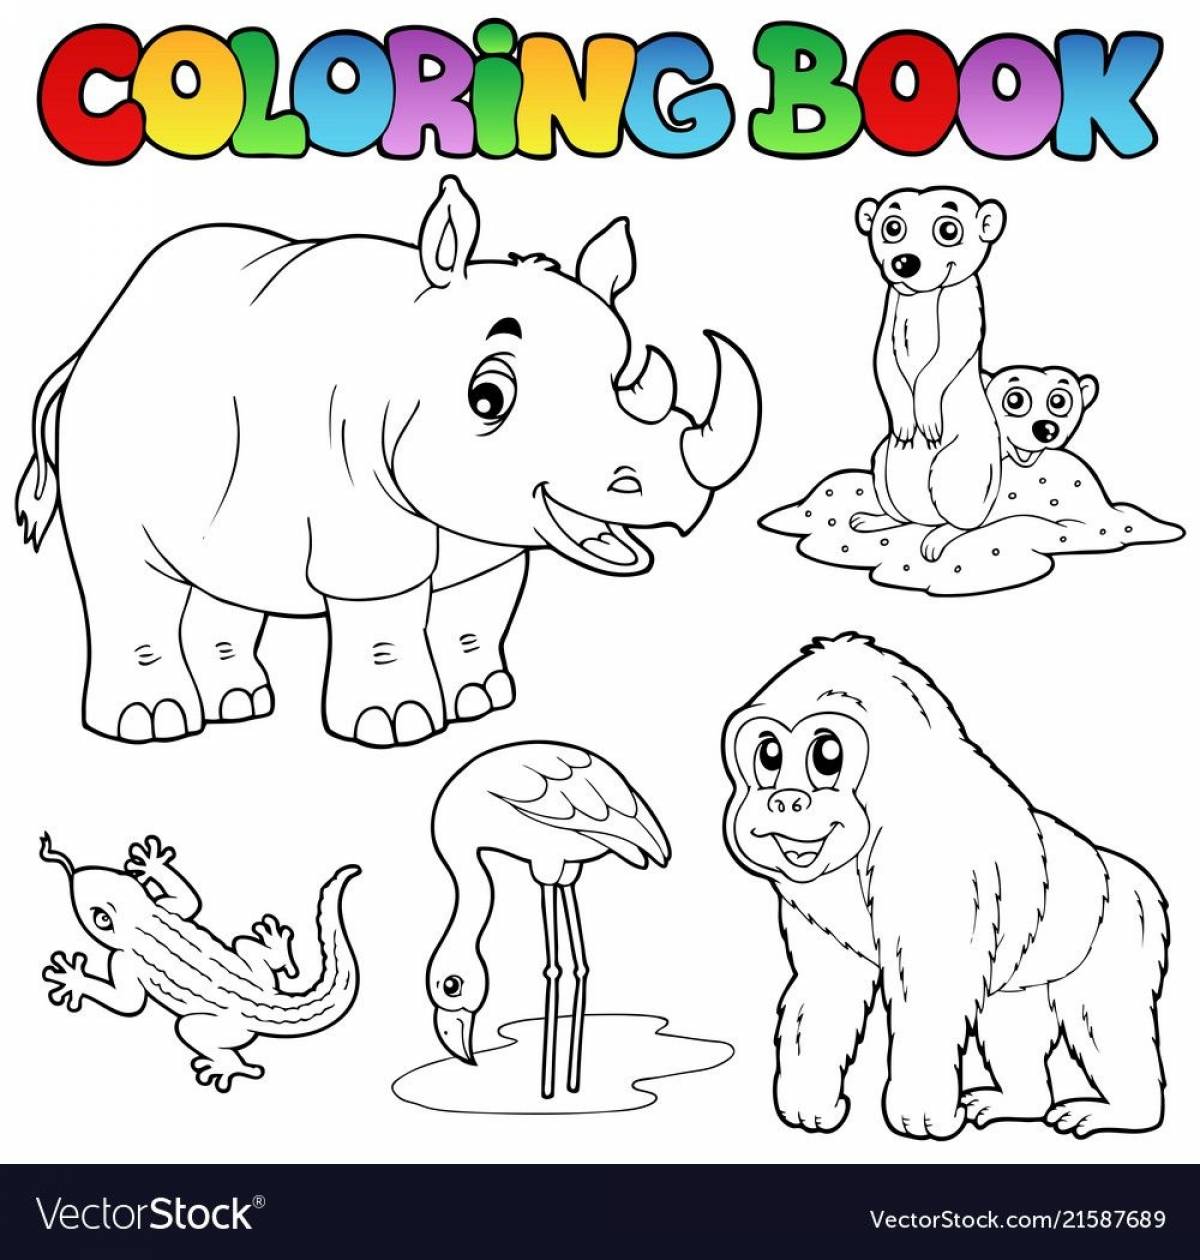 Fun zoo coloring book for 3-4 year olds